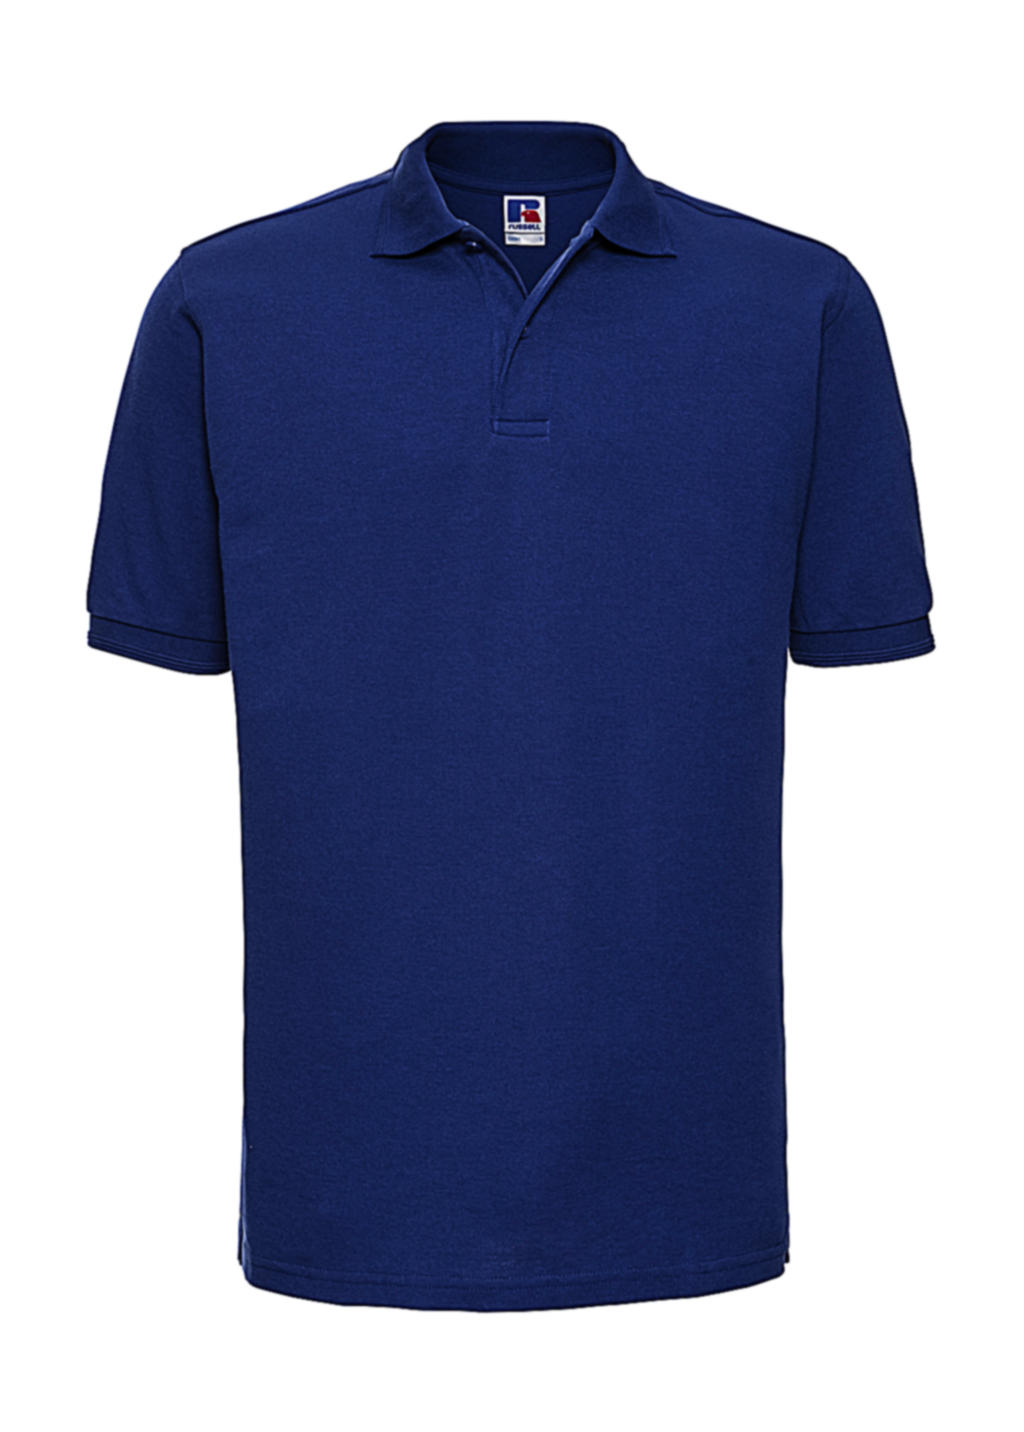  Hardwearing Polo - 5XL and 6XL in Farbe Bright Royal